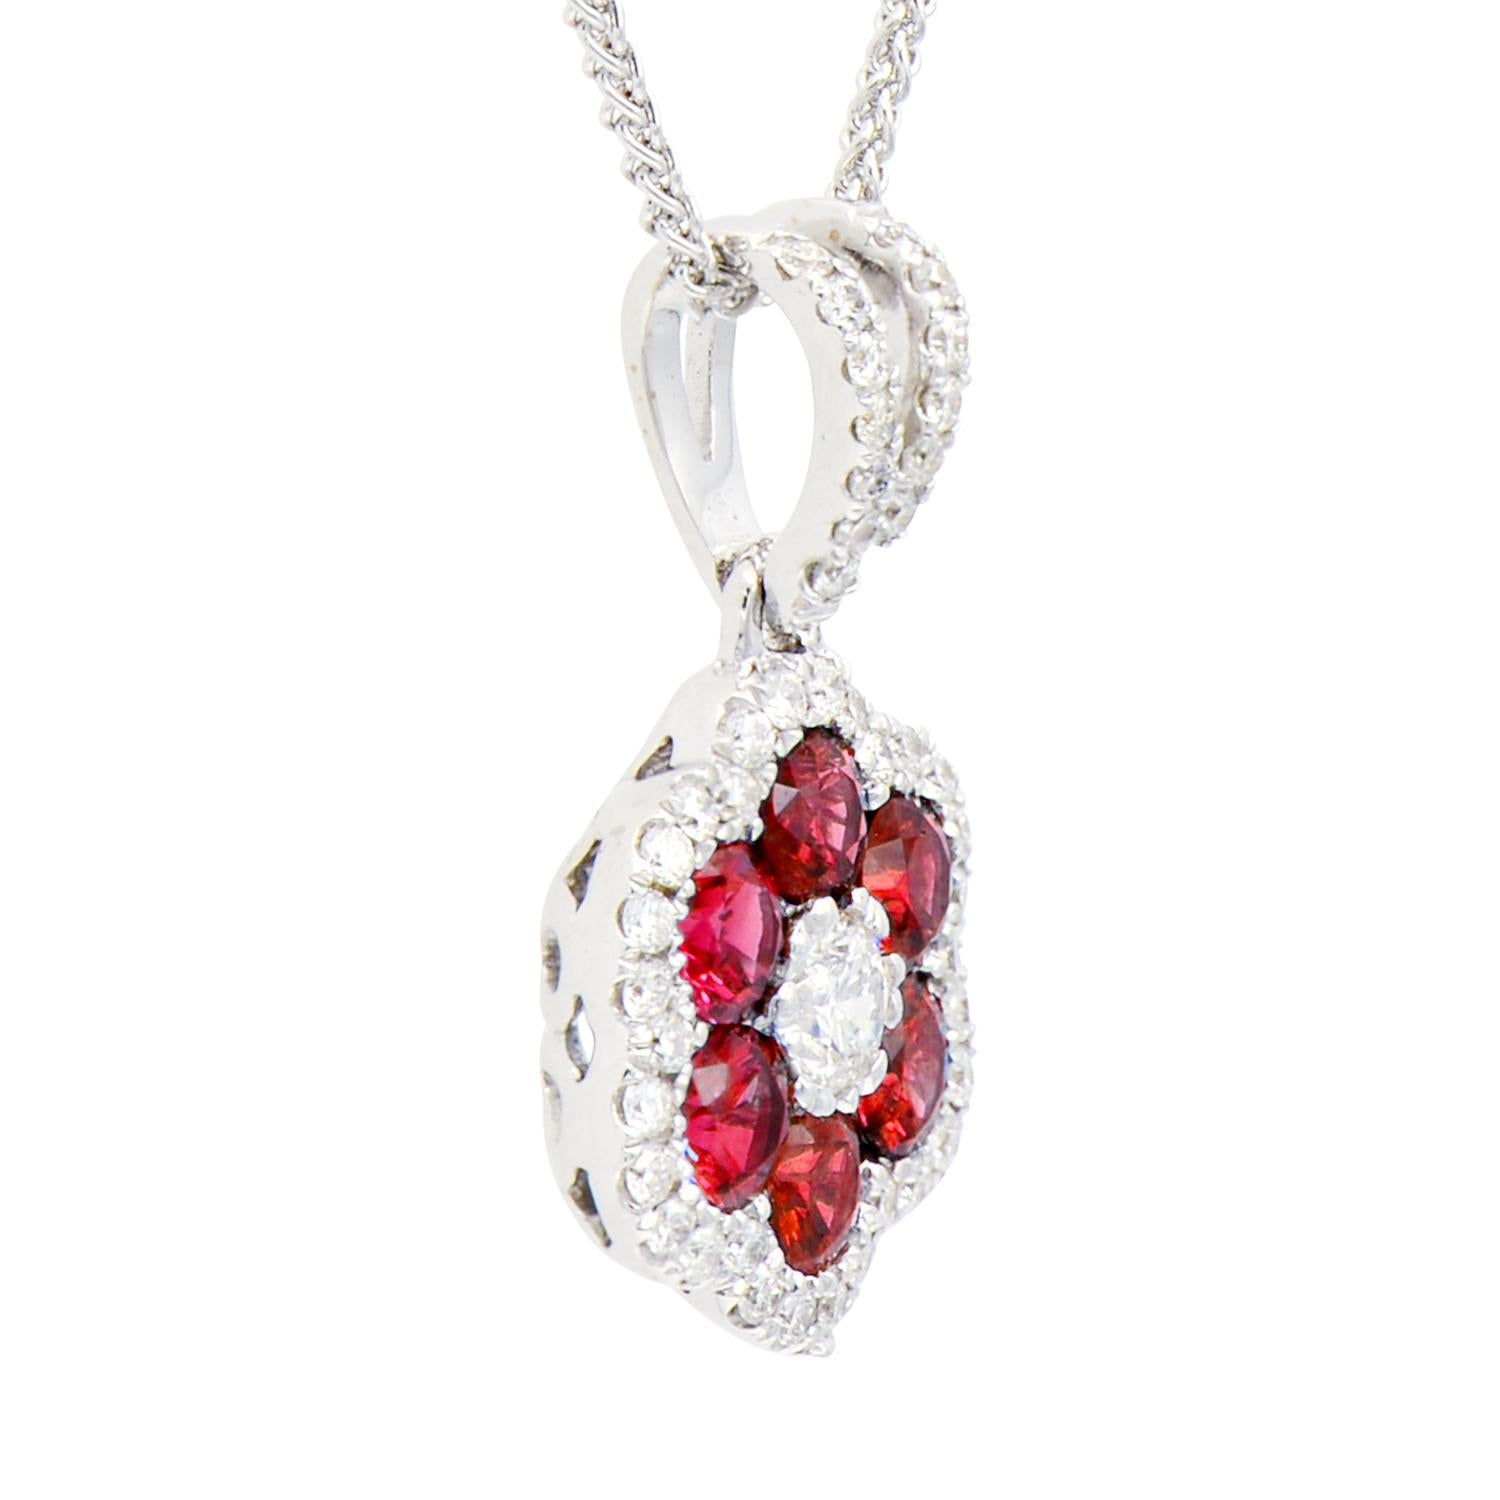 This beautiful pendant is made from 1.5 grams of 14 karat white gold. The flower shape is made from 6 rubies totaling 0.83 carats with VS2, G color diamonds for the center and as a halo around the rubies as well as on the bail of the pendant. There